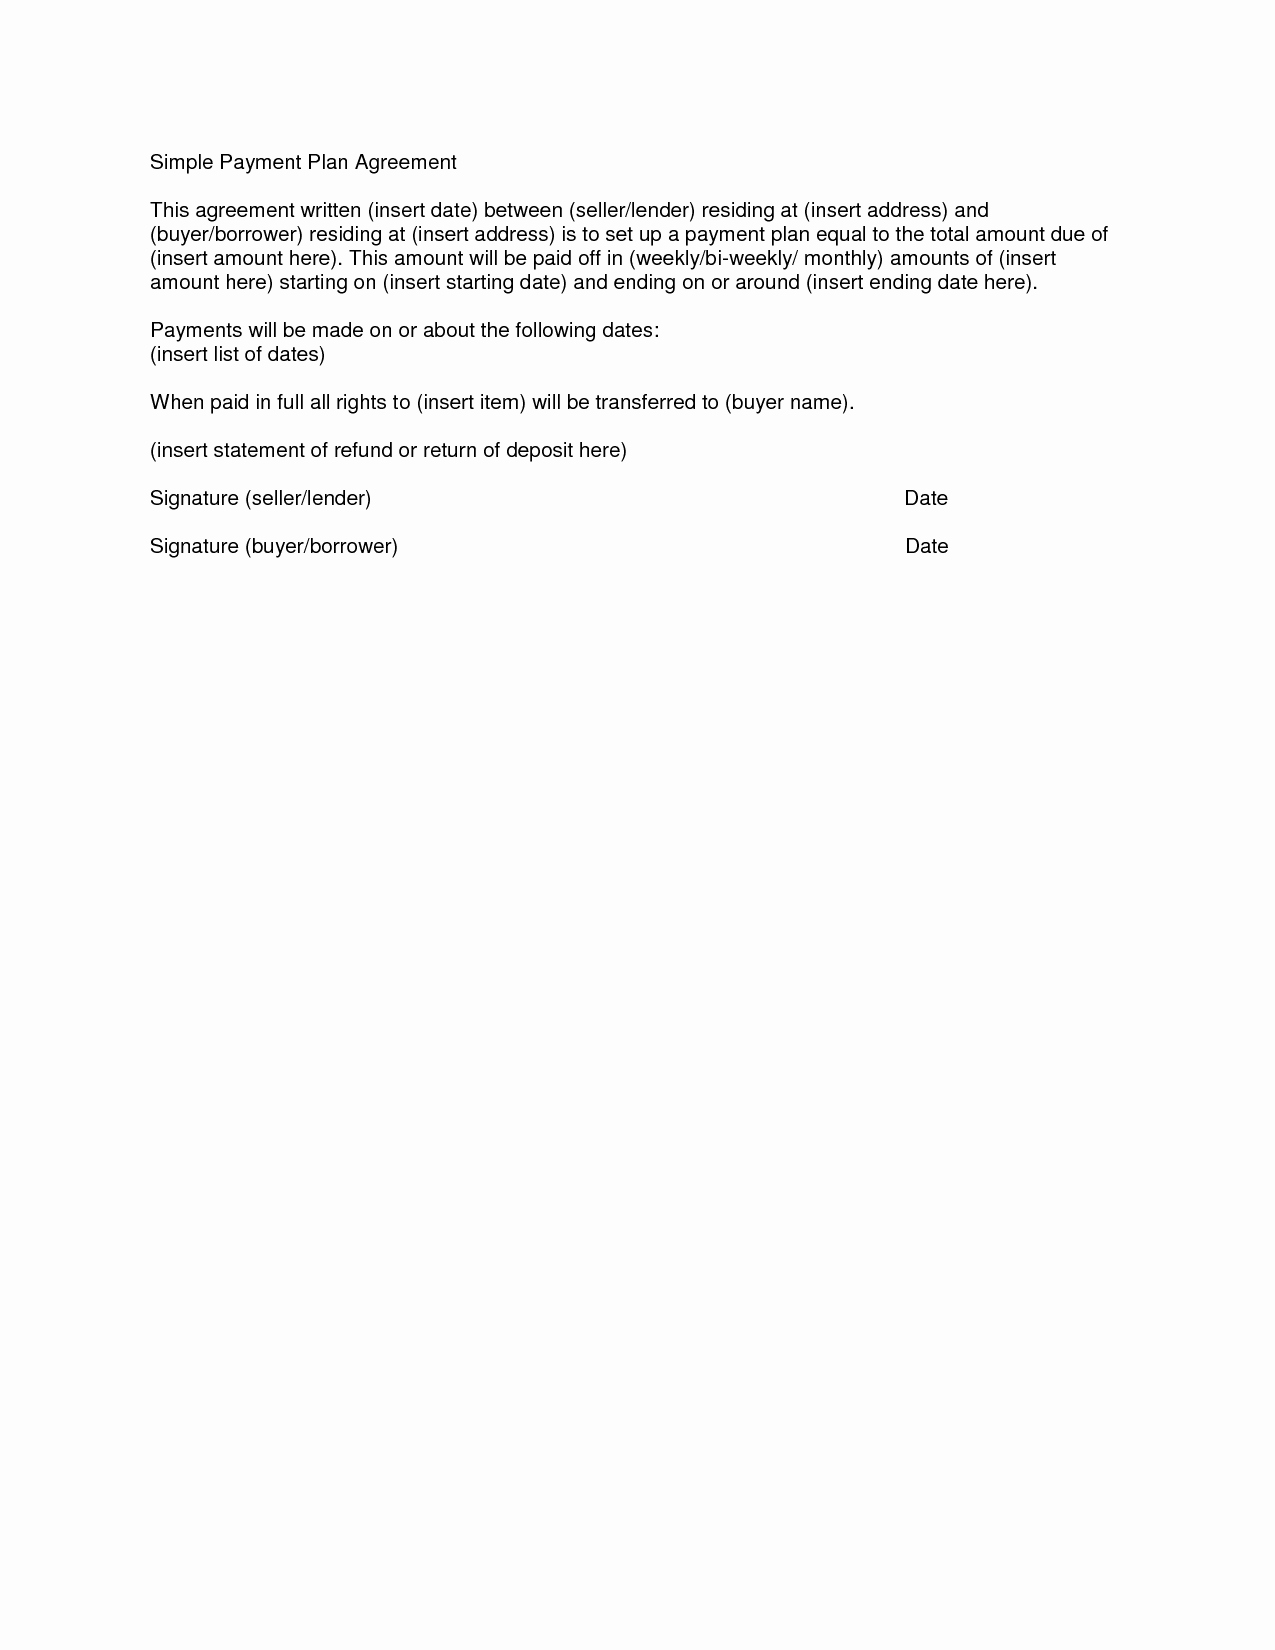 Simple Payment Plan Agreement Template Inspirational Simple Payment Plan Agreement Template